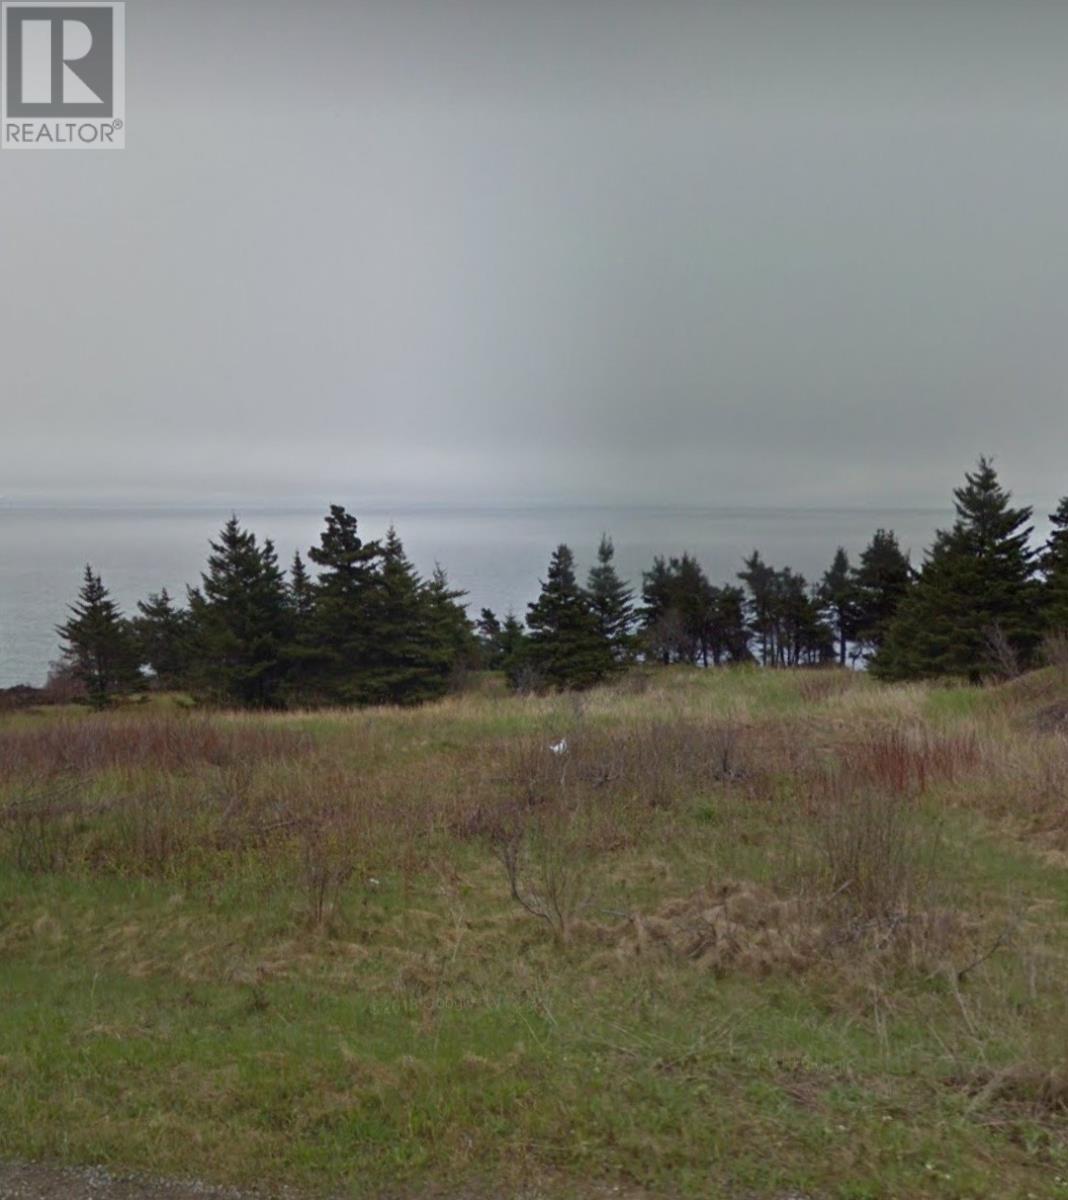 261 Front Road located in Port Au Port West, Newfoundland and Labrador